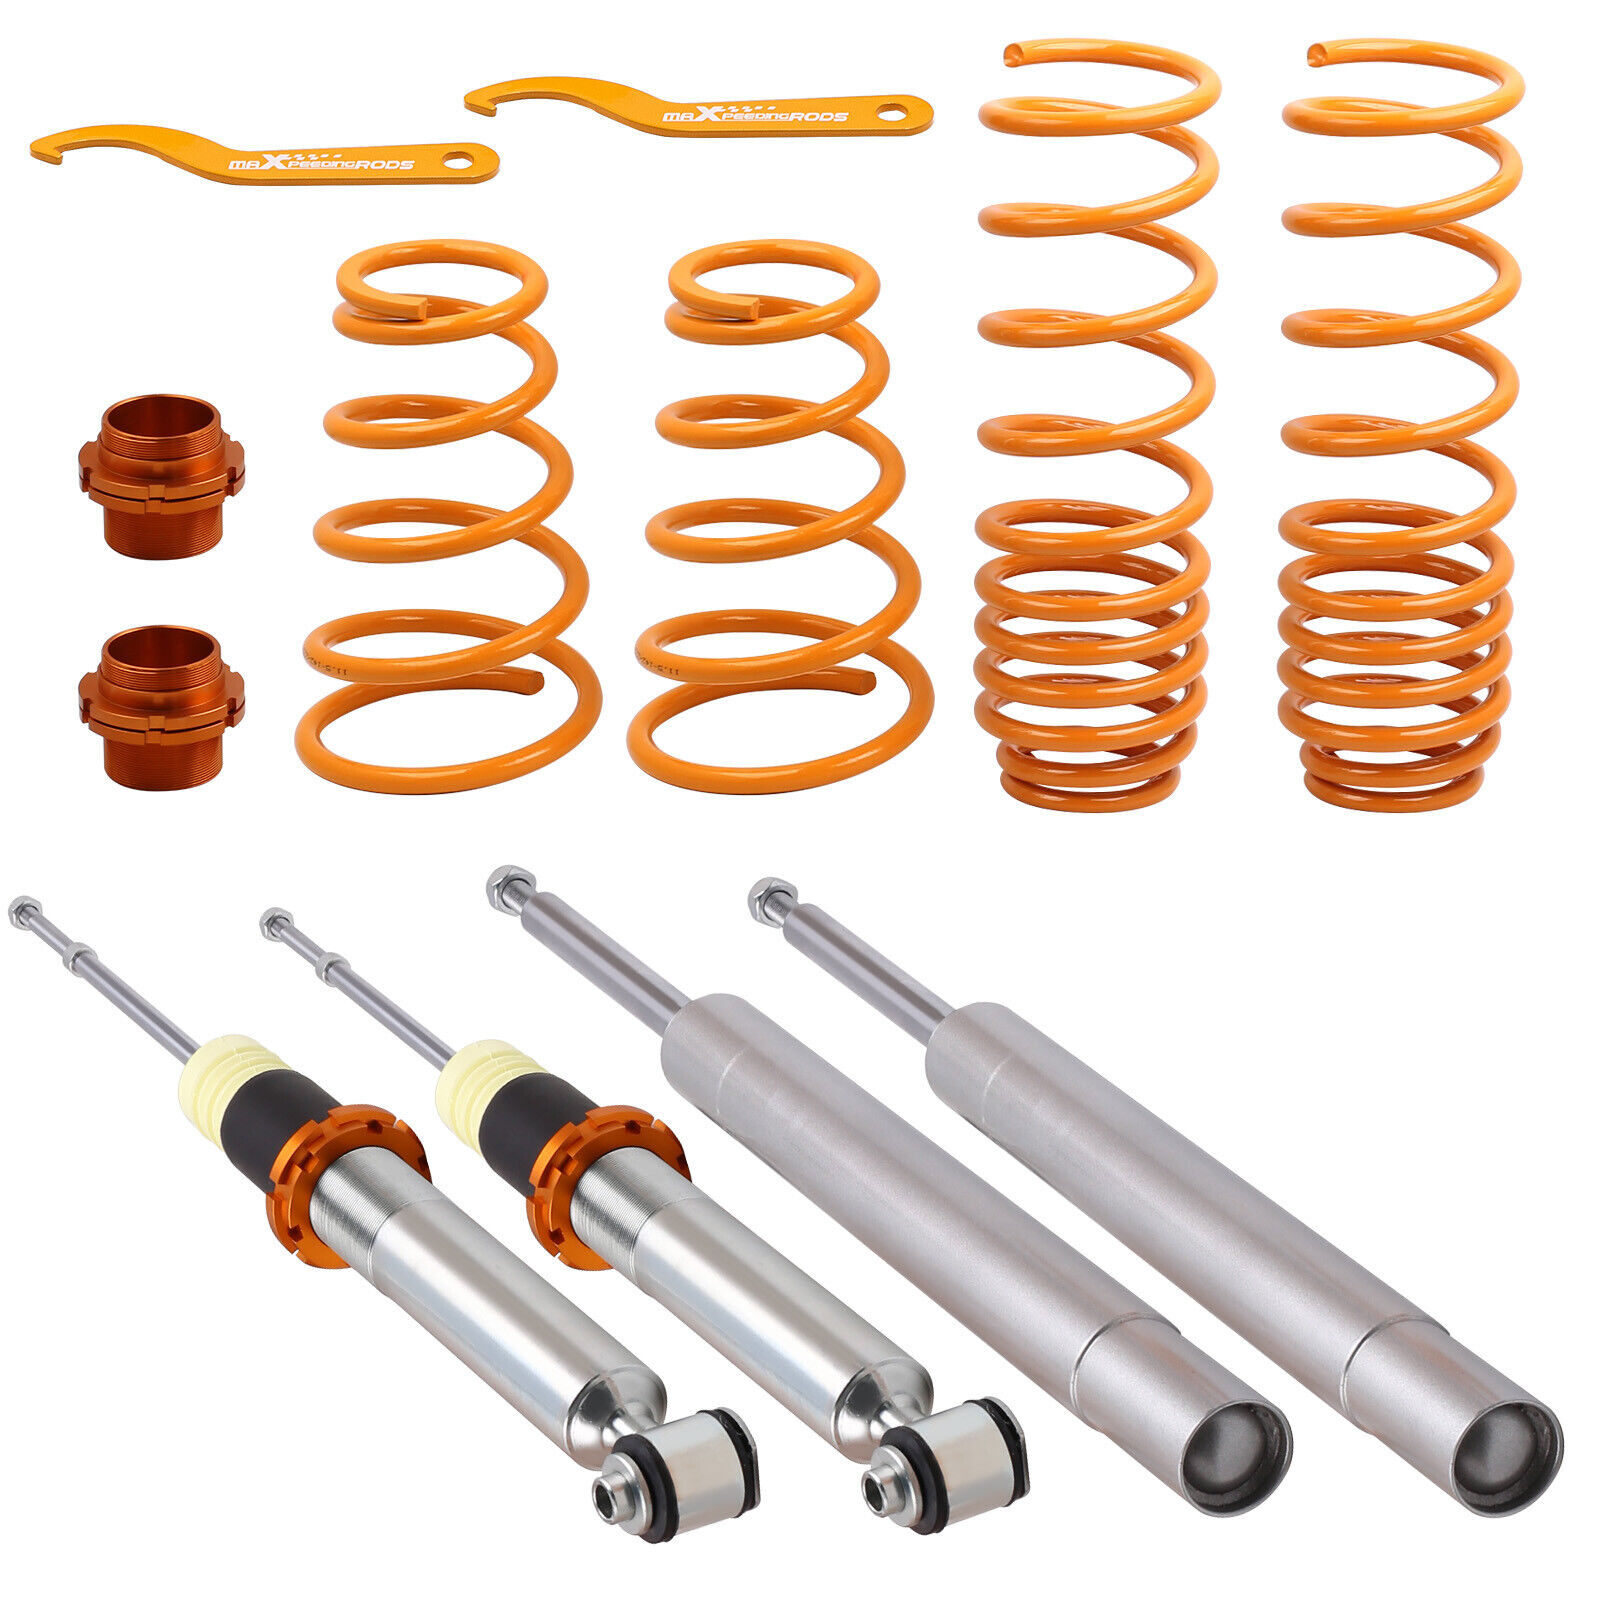 Coilovers Adjustable Height Kits For BMW E34 5 series 525i 535i 540i RWD 55MM